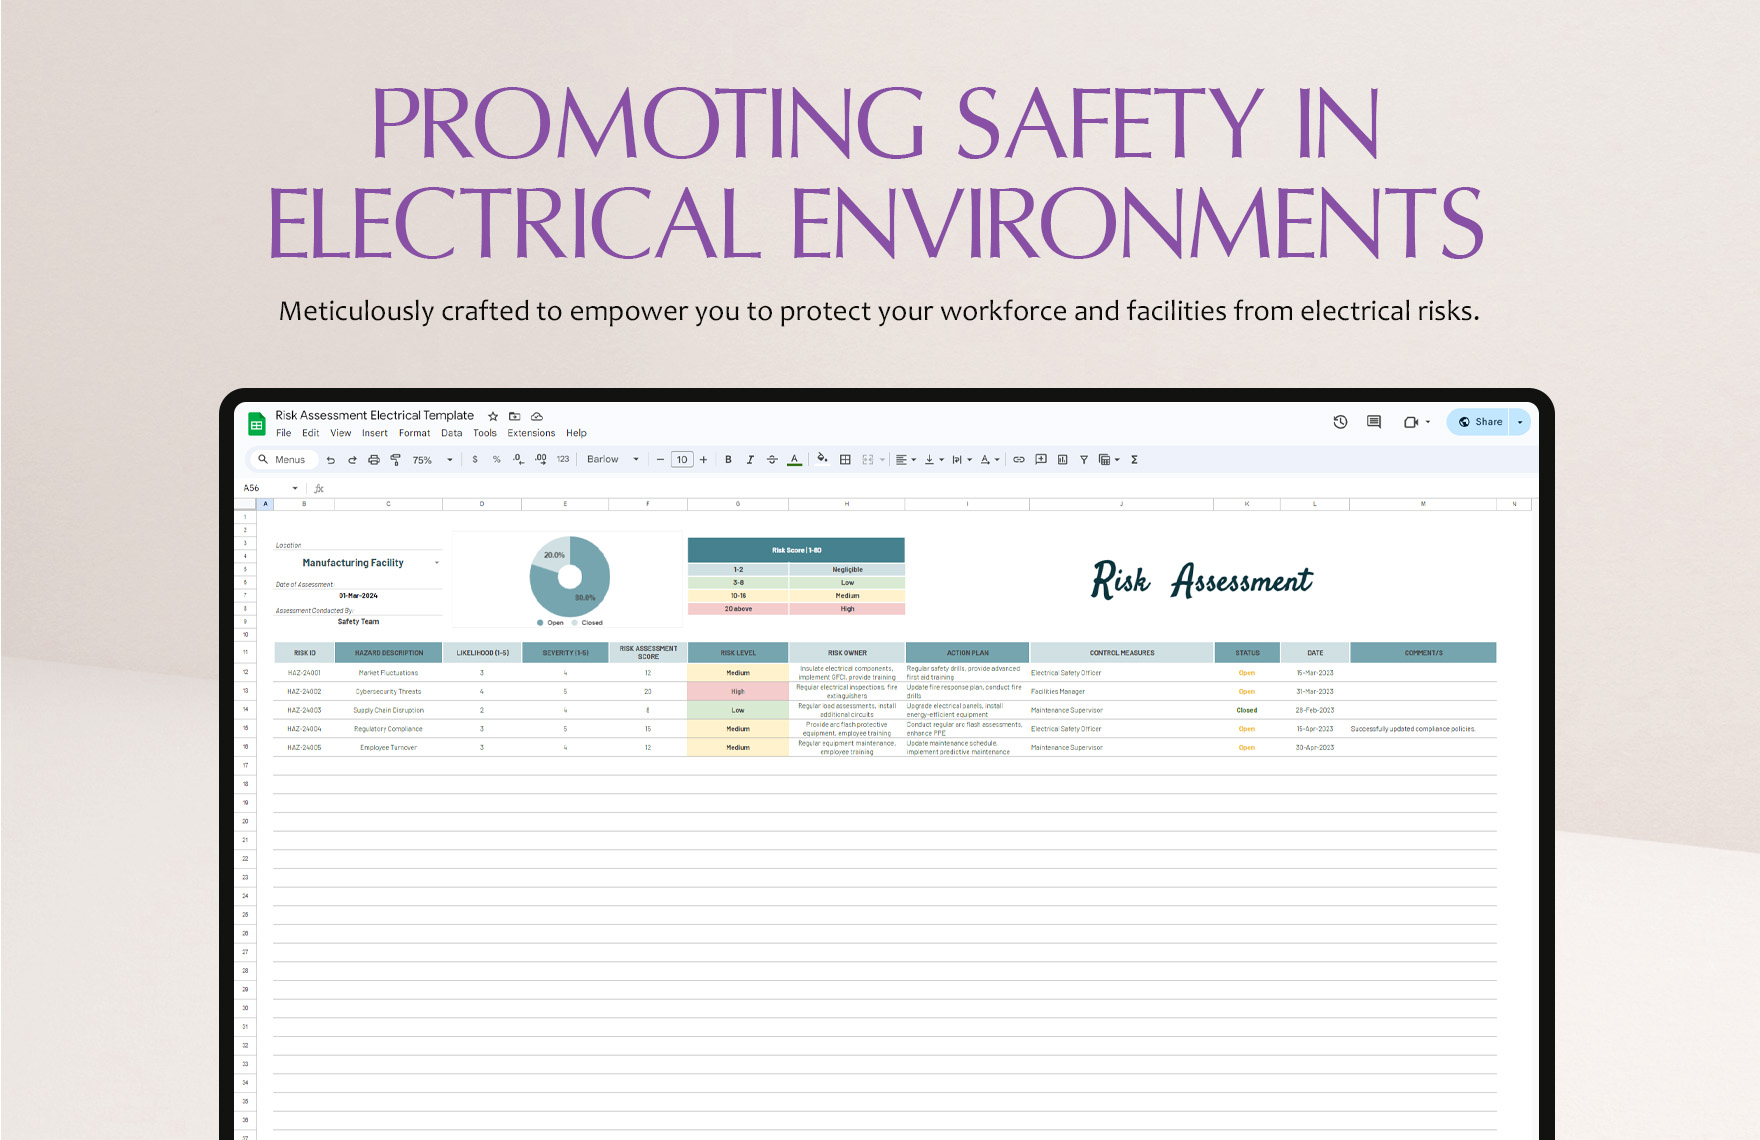 Risk Assessment Electrical Template